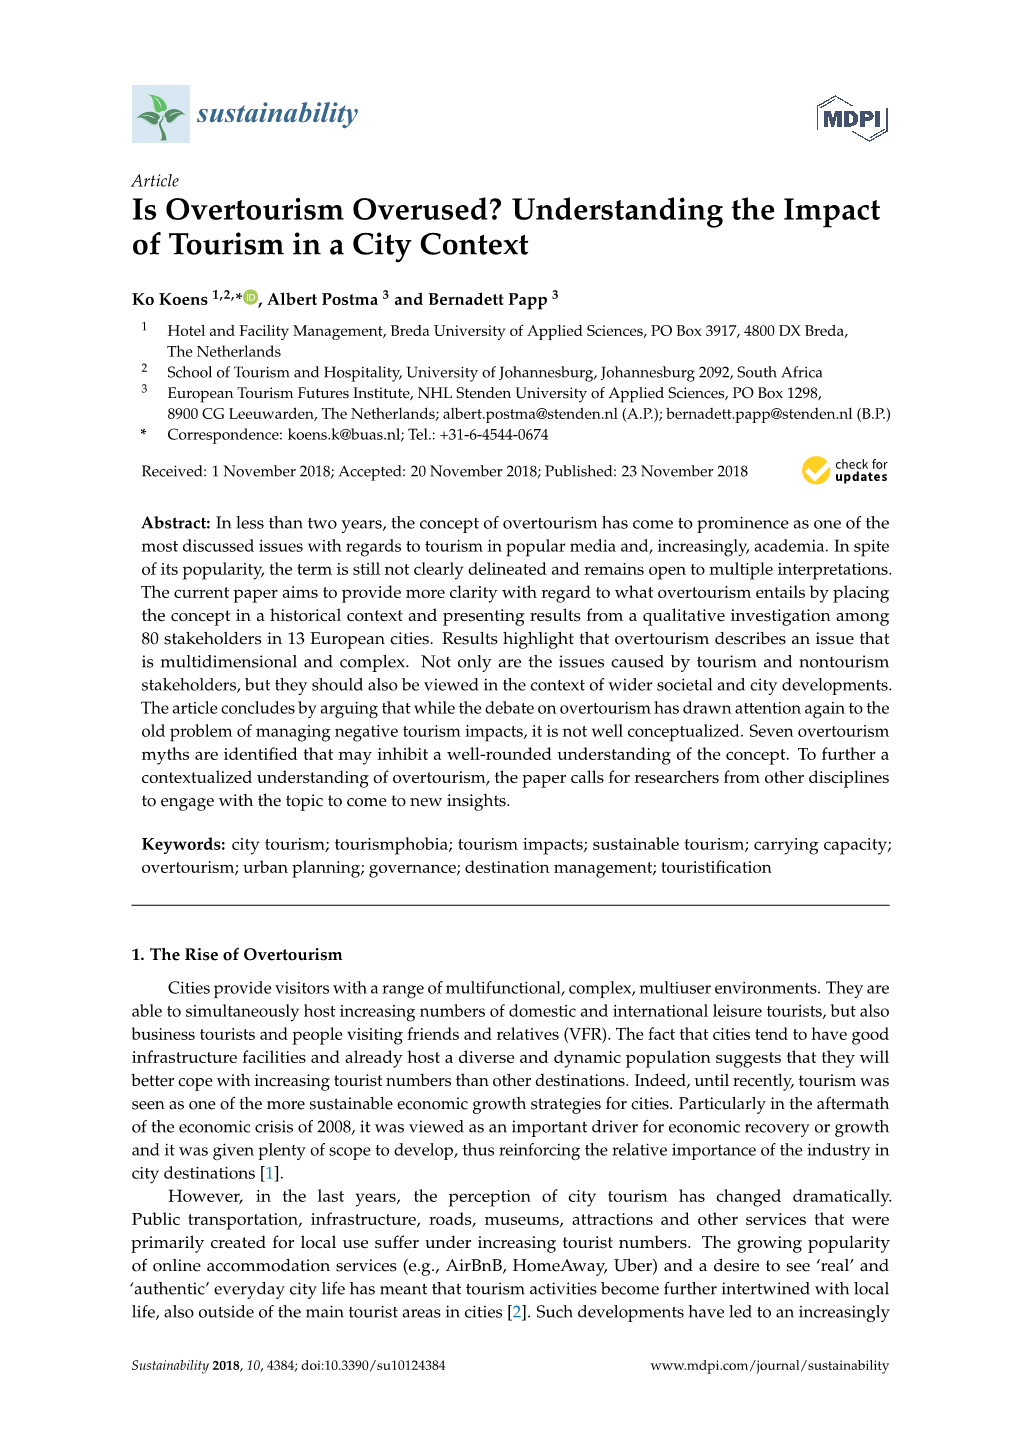 Understanding the Impact of Tourism in a City Context